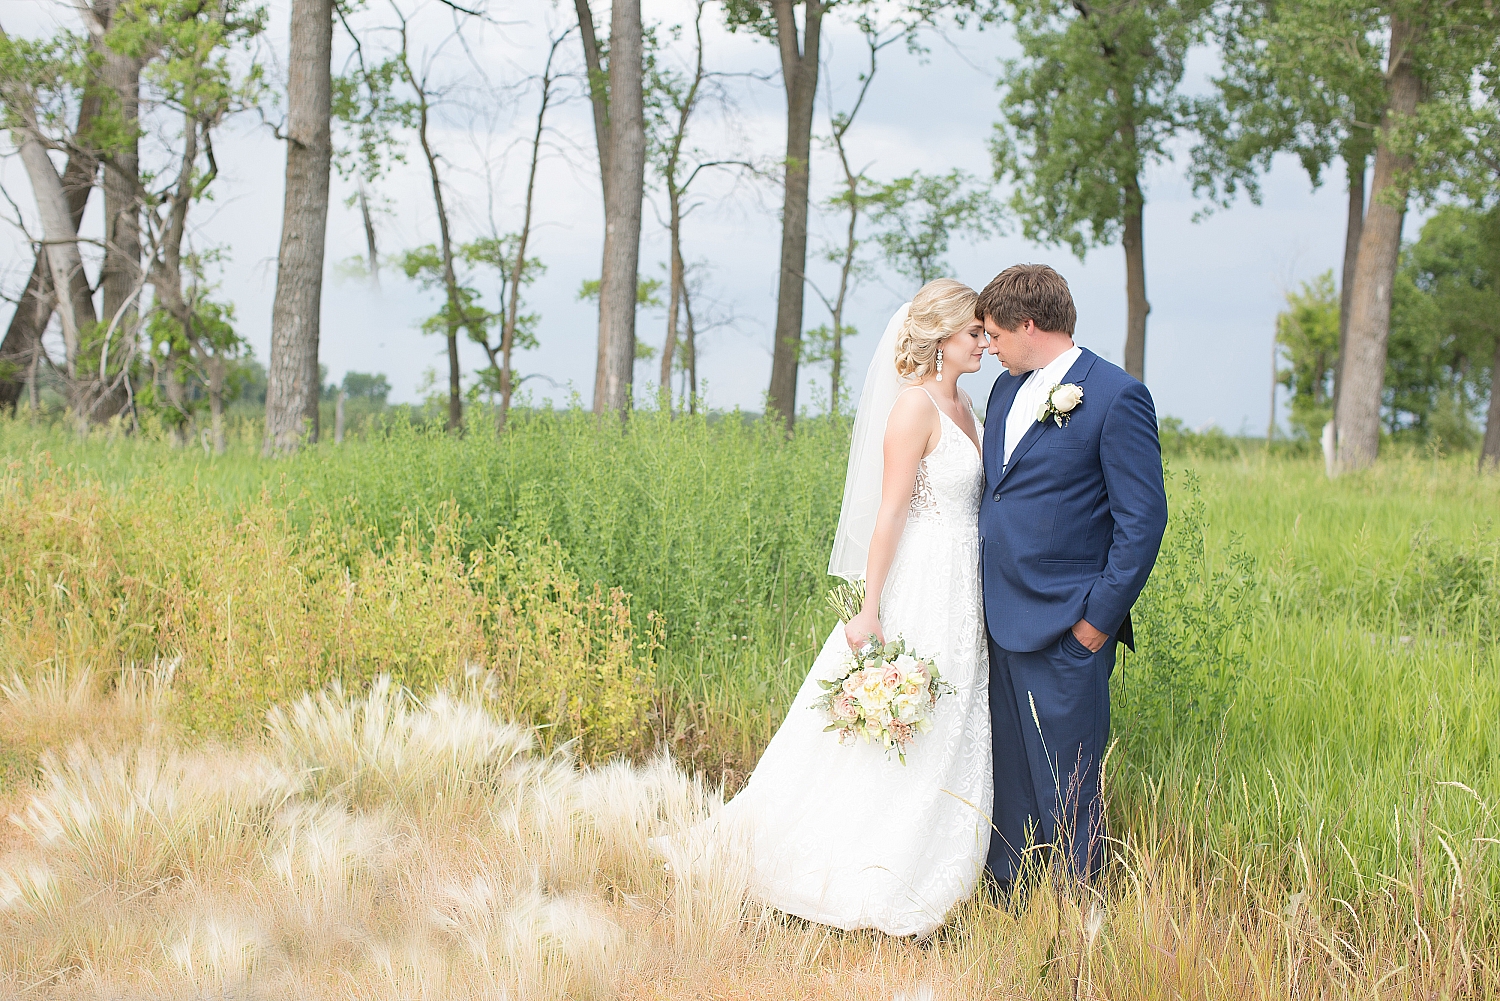 Photography by Justine | Wedding photographer in Bismarck  ND 